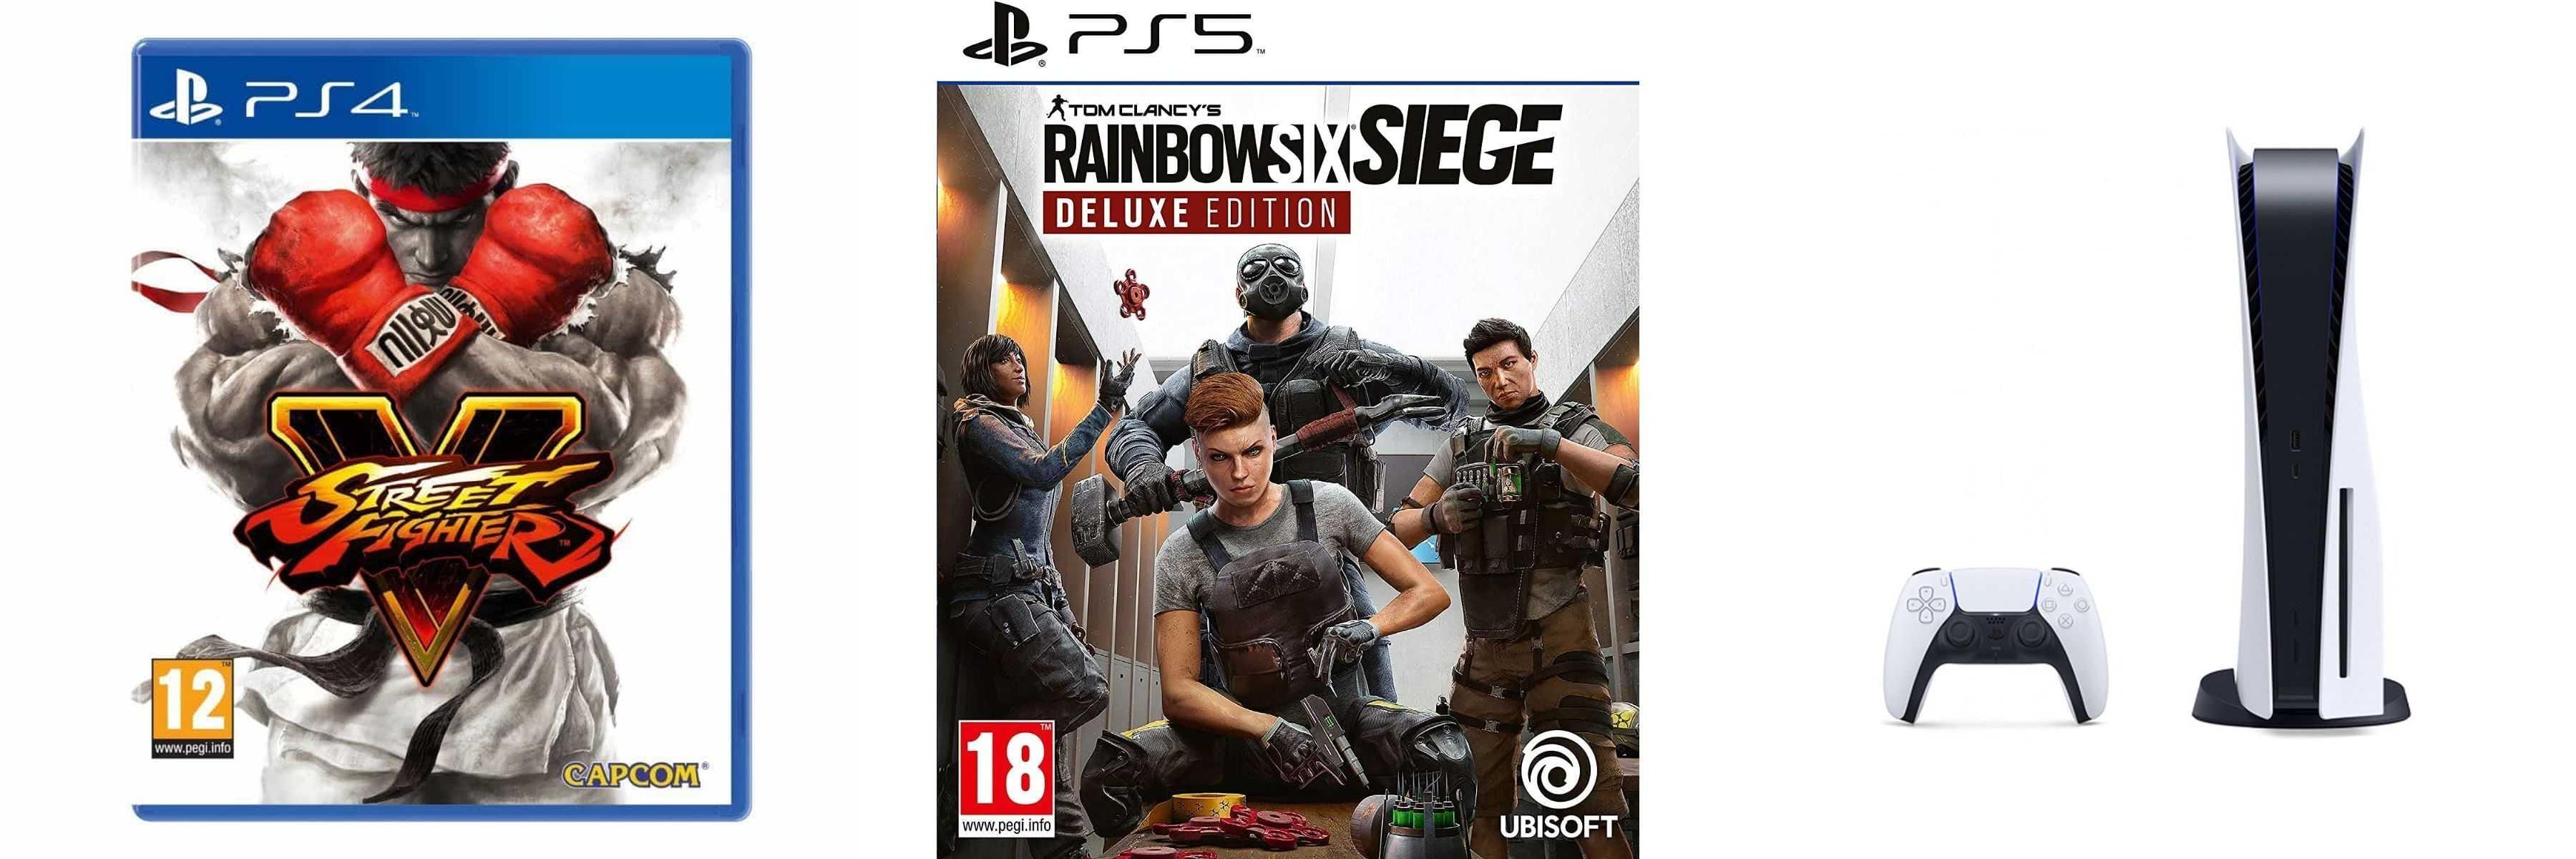 Sony PlayStation 5, 1 Wireless Controller, White - CFI-1016A01 MEE, with Street Fighter 5 Game for PlayStation 4, and Tom Clancy's Rainbow Six Siege, Deluxe Edition for PlayStation5